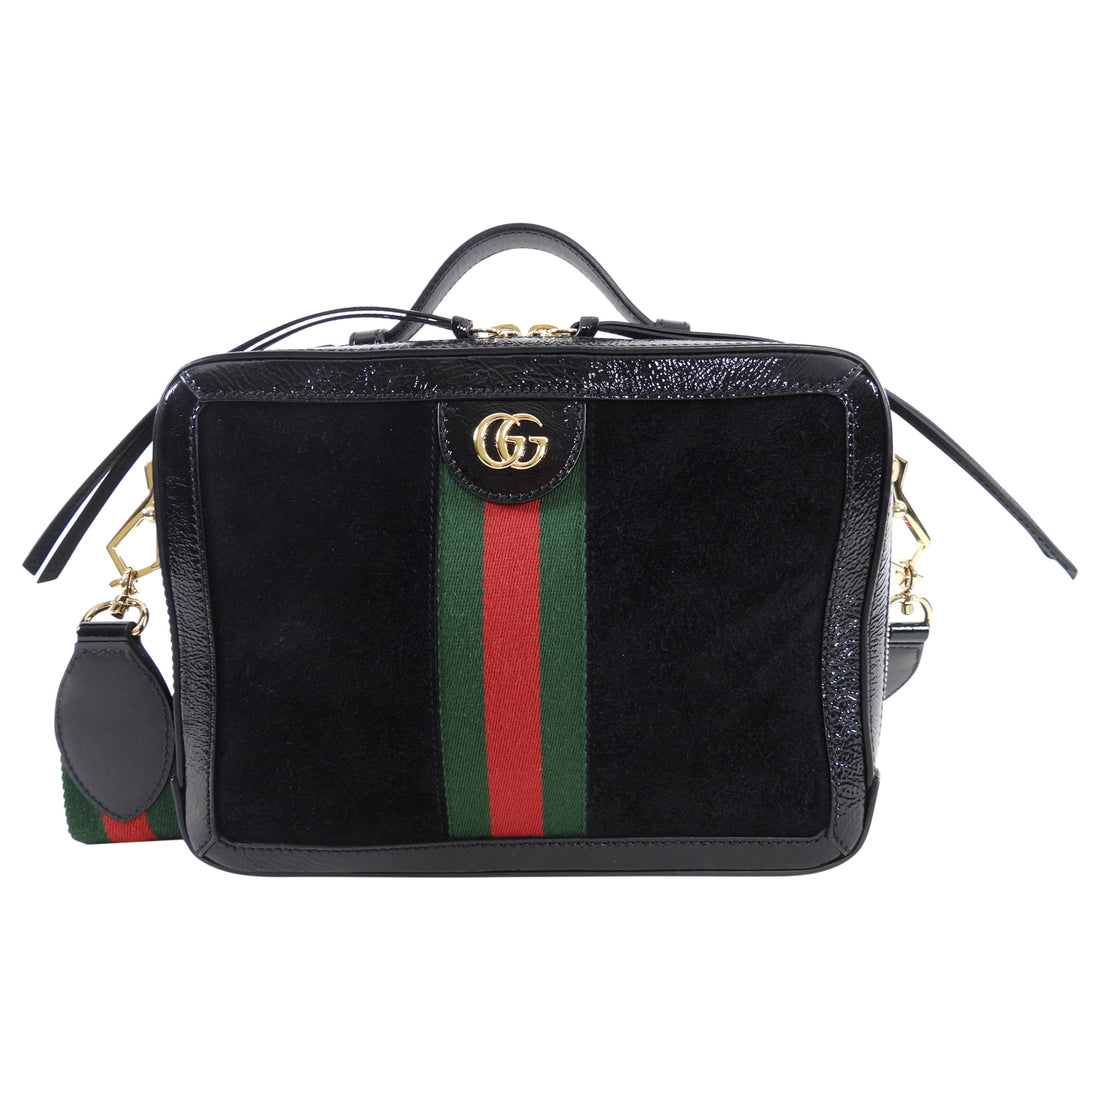 Gucci Black Patent and Suede Web Stripe Ophidia Crossbody Bag